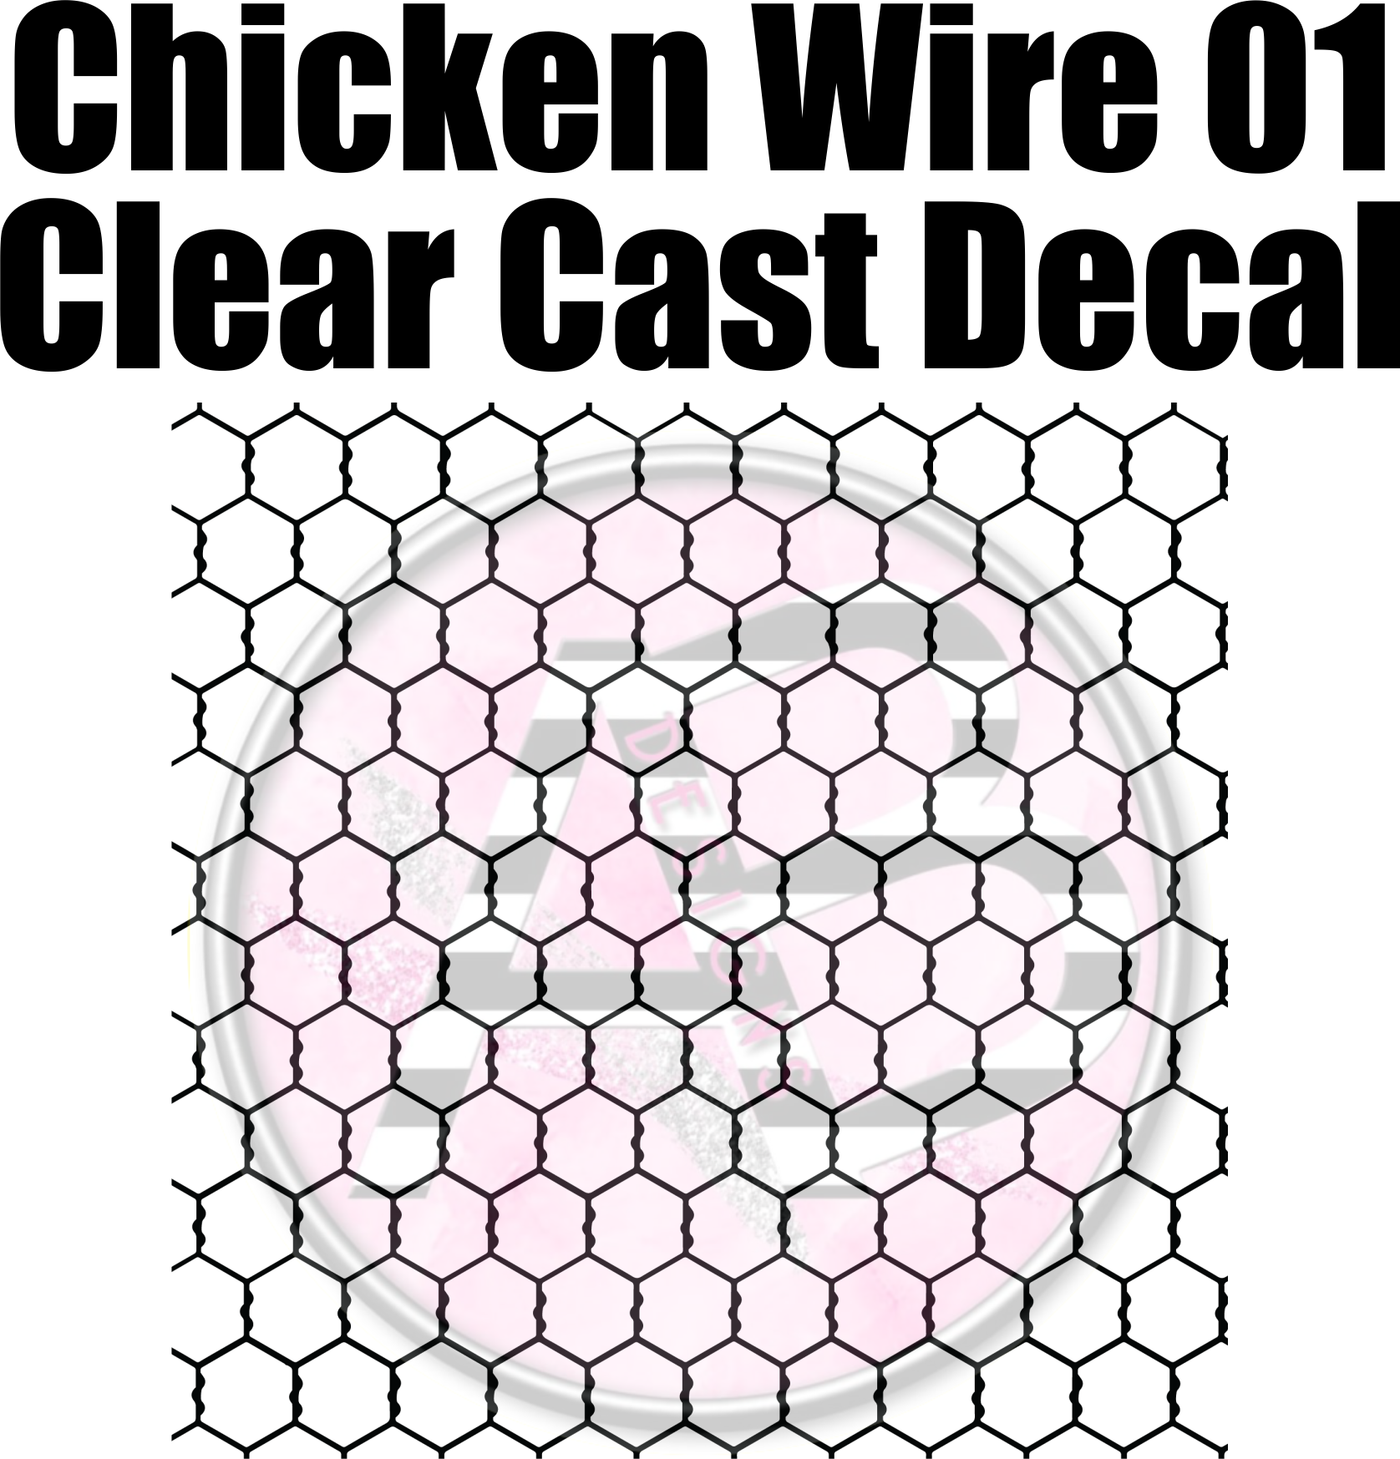 Chicken Wire Full Sheet 12 x 12 Clear Cast Decal